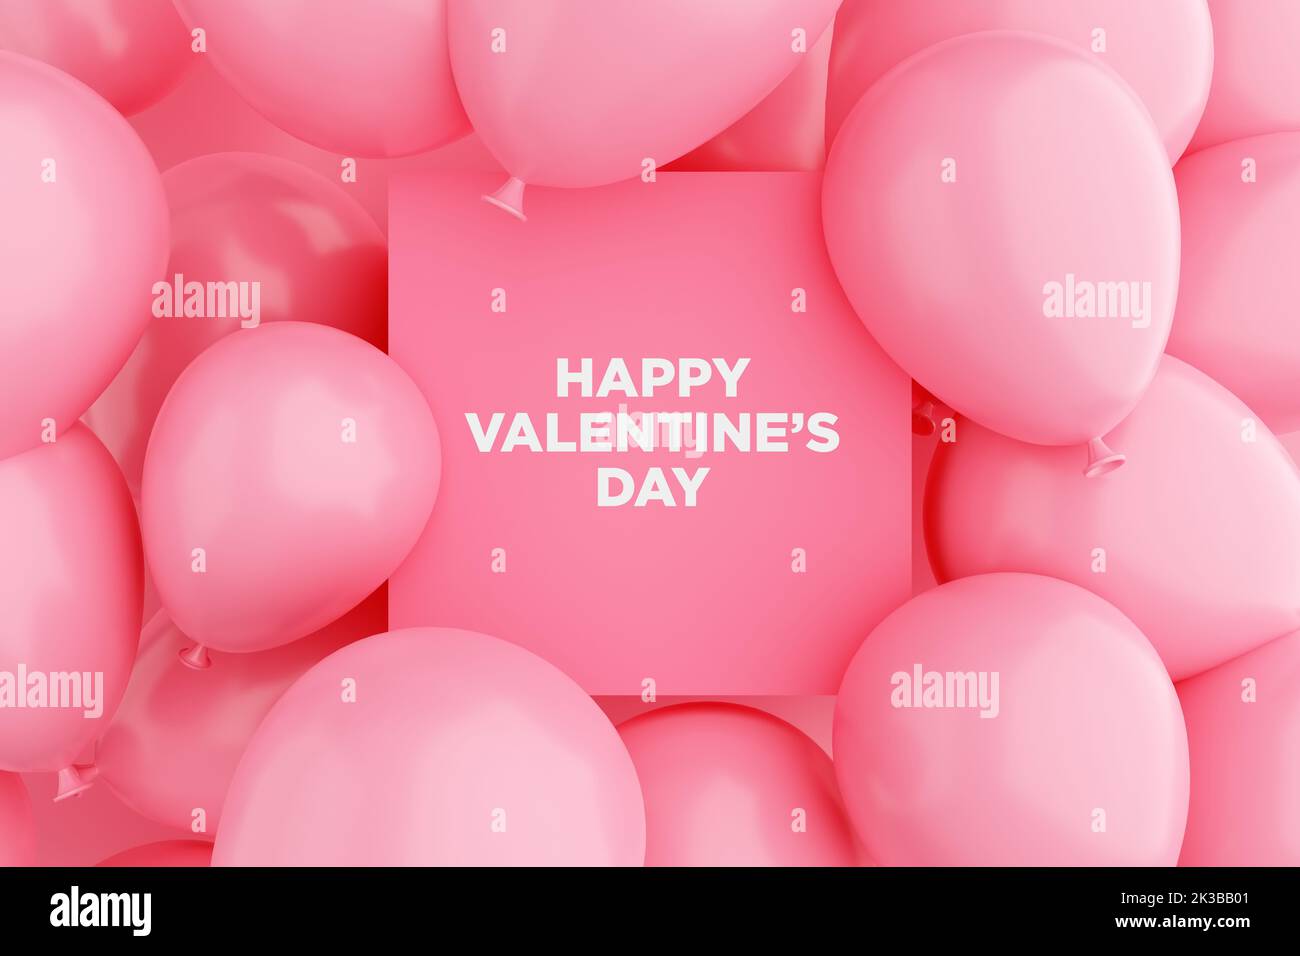 Pink sign frame with the message HAPPY VALENTINE'S DAY surrounded with pink air balloons. Happy valentines day greeting celebration concept. 3D render Stock Photo